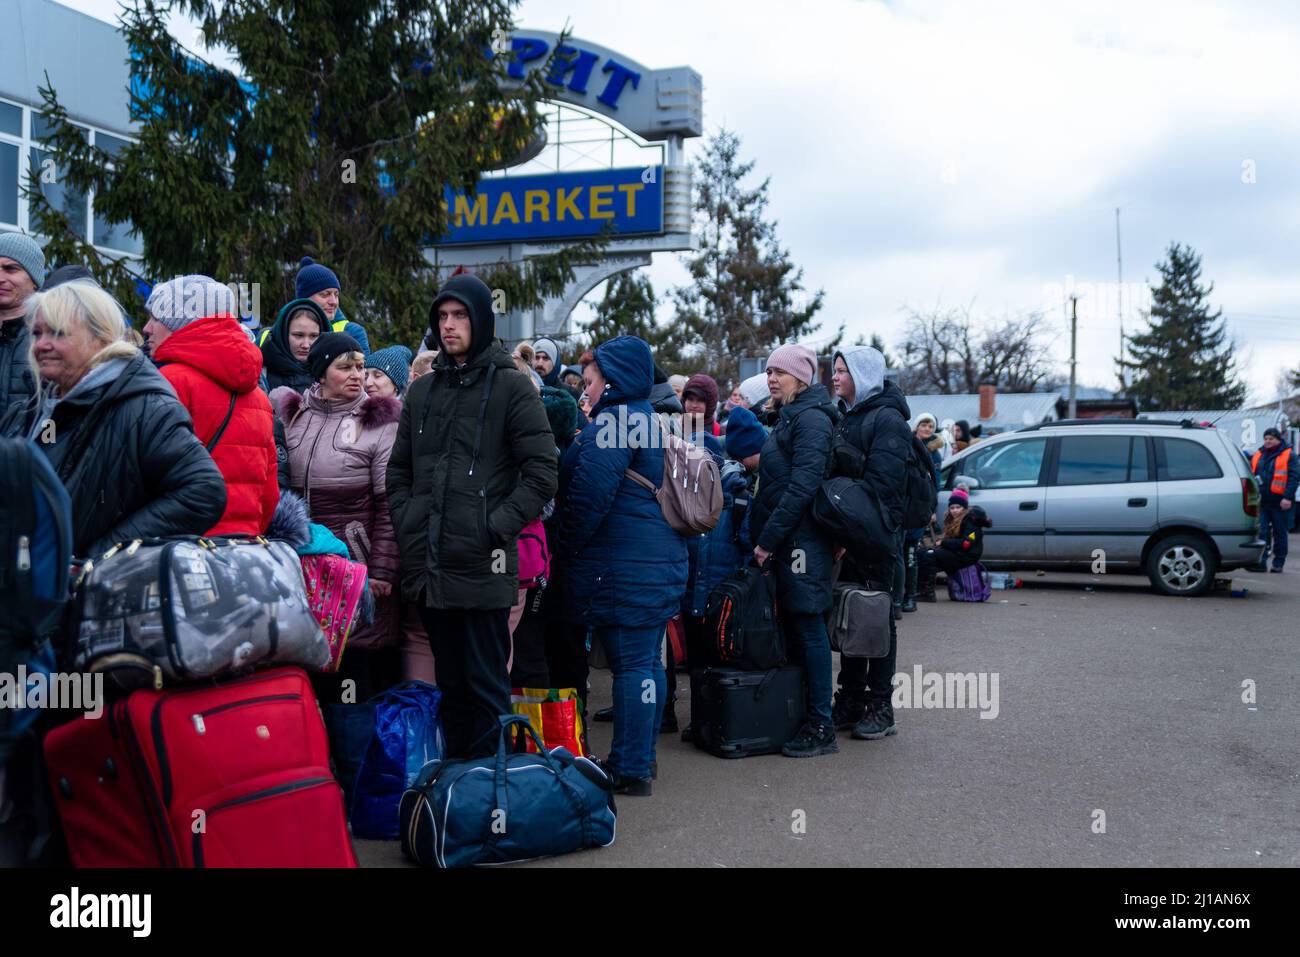 Refugees from Ukraine wait in line as they cross the Poland-Ukraine border fleeing the Russia-Ukraine war in Sheyni, Ukraine on March 8, 2022. More th Stock Photo